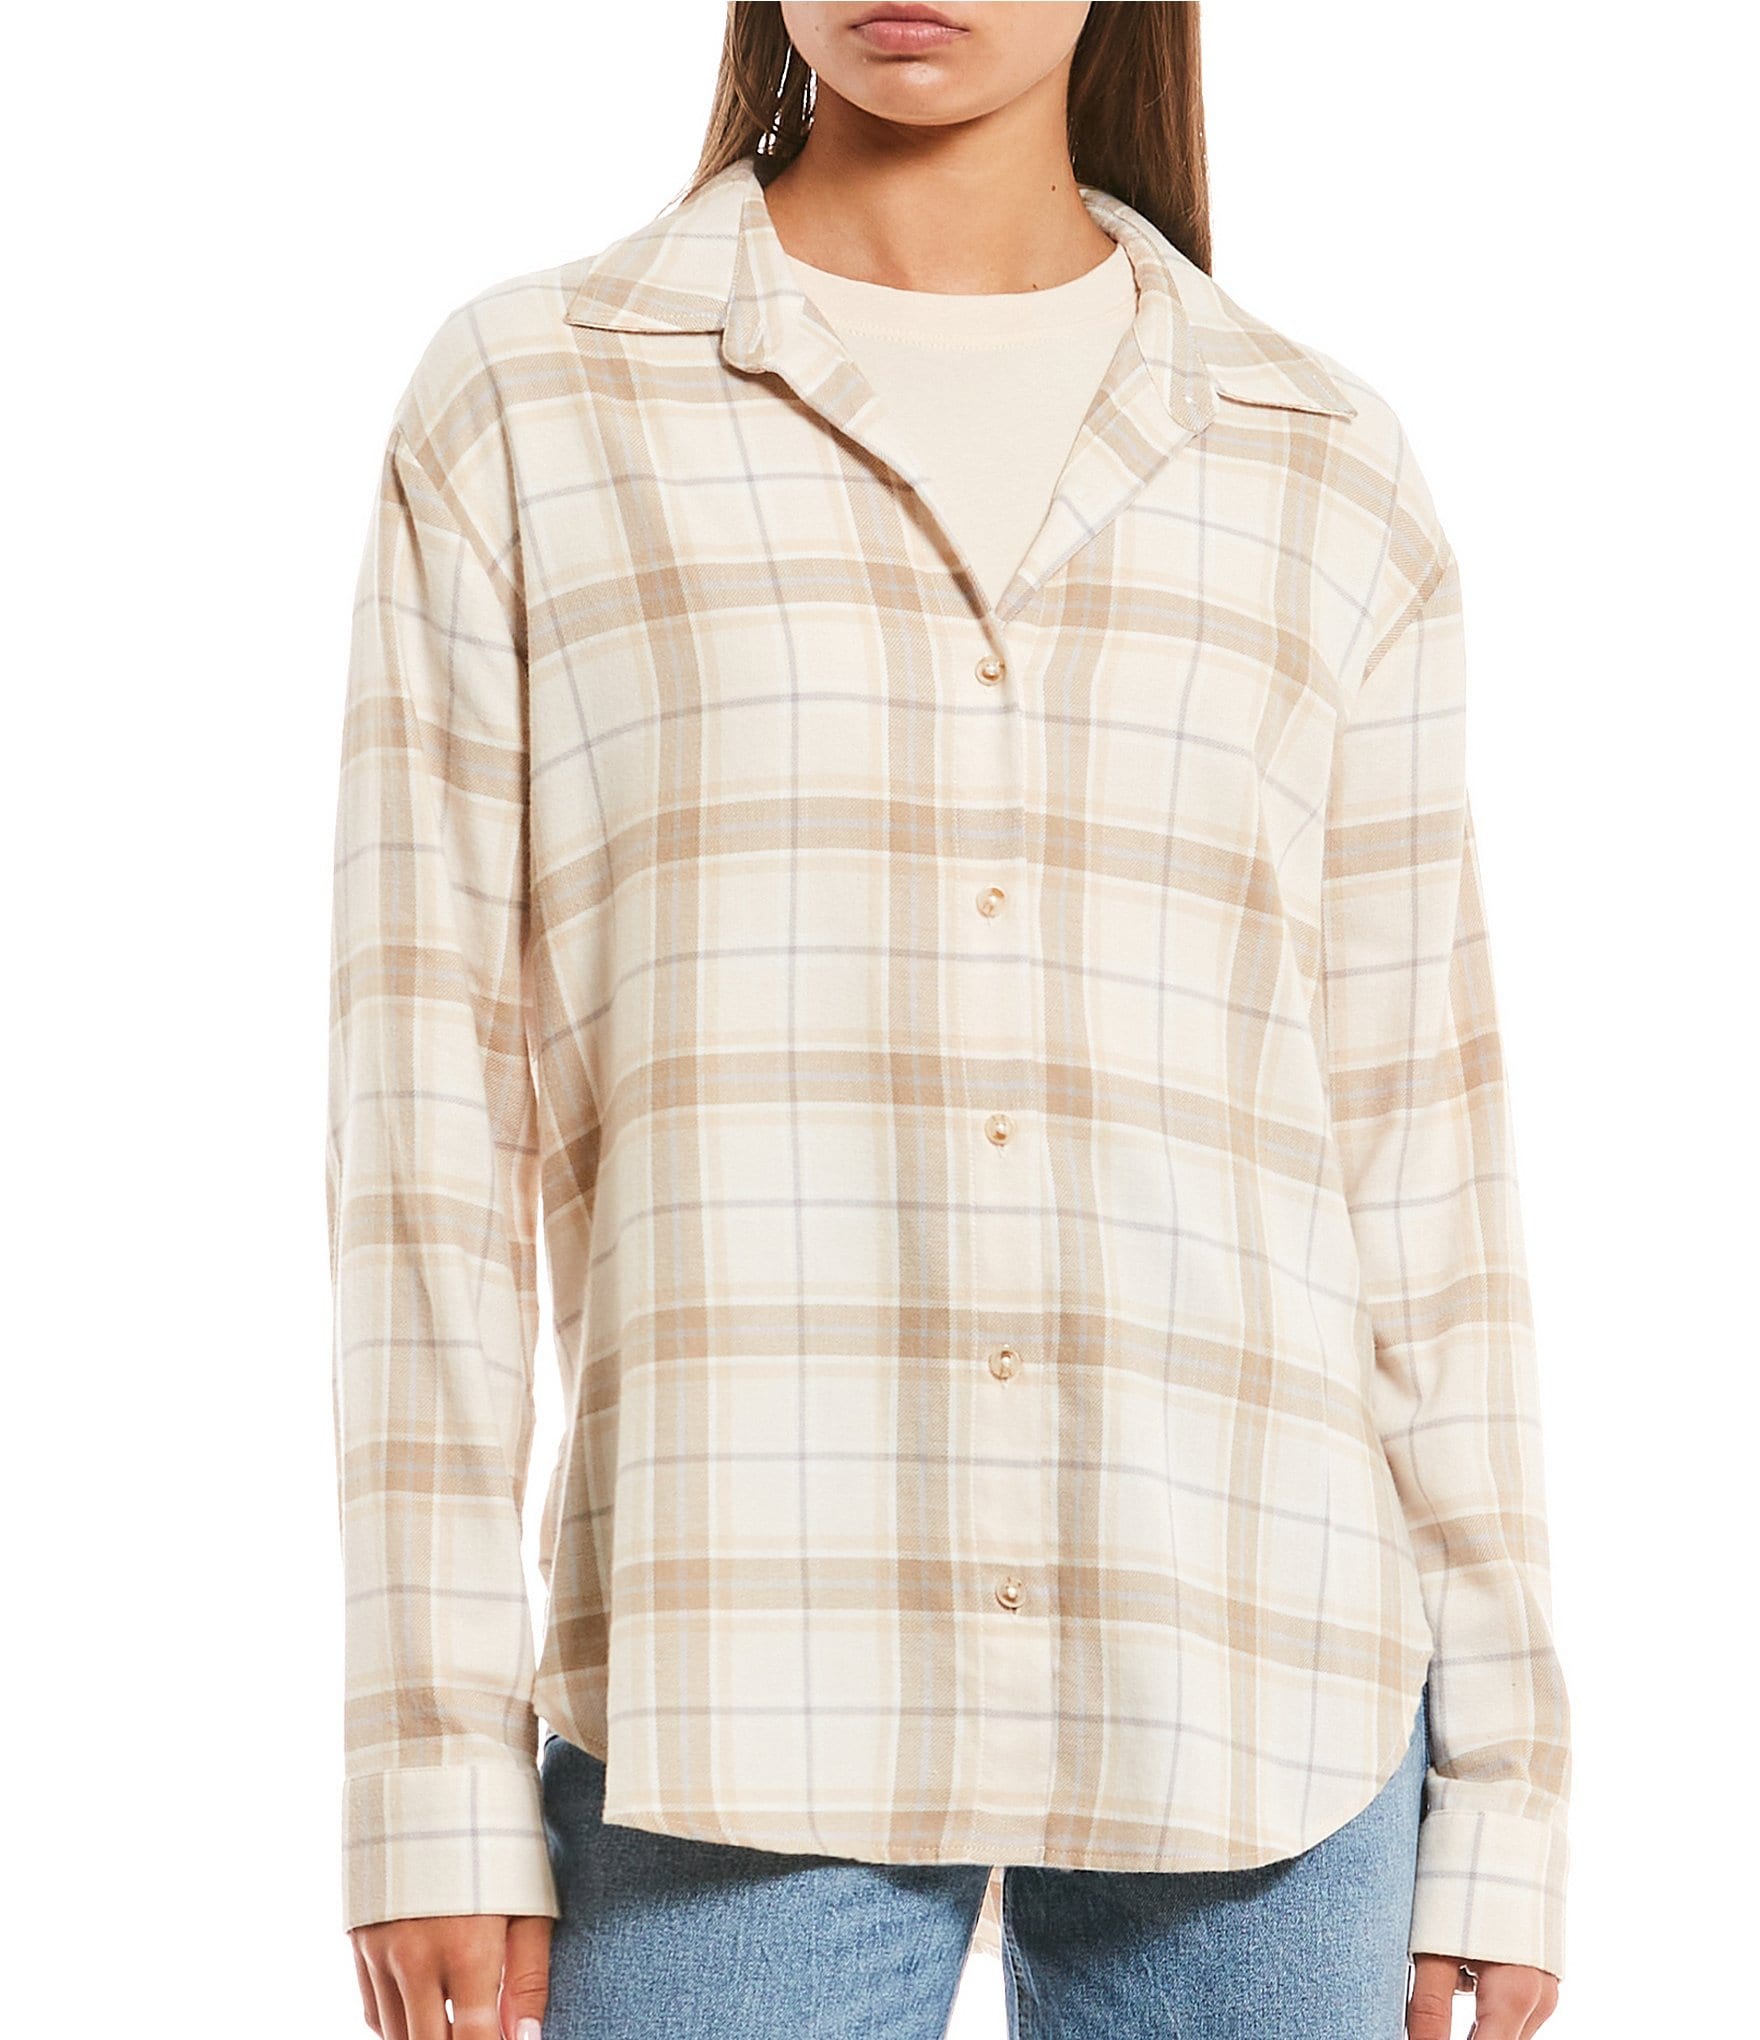 Copper Key Checked Plaid Button Front Flannel Shirt | Dillard's